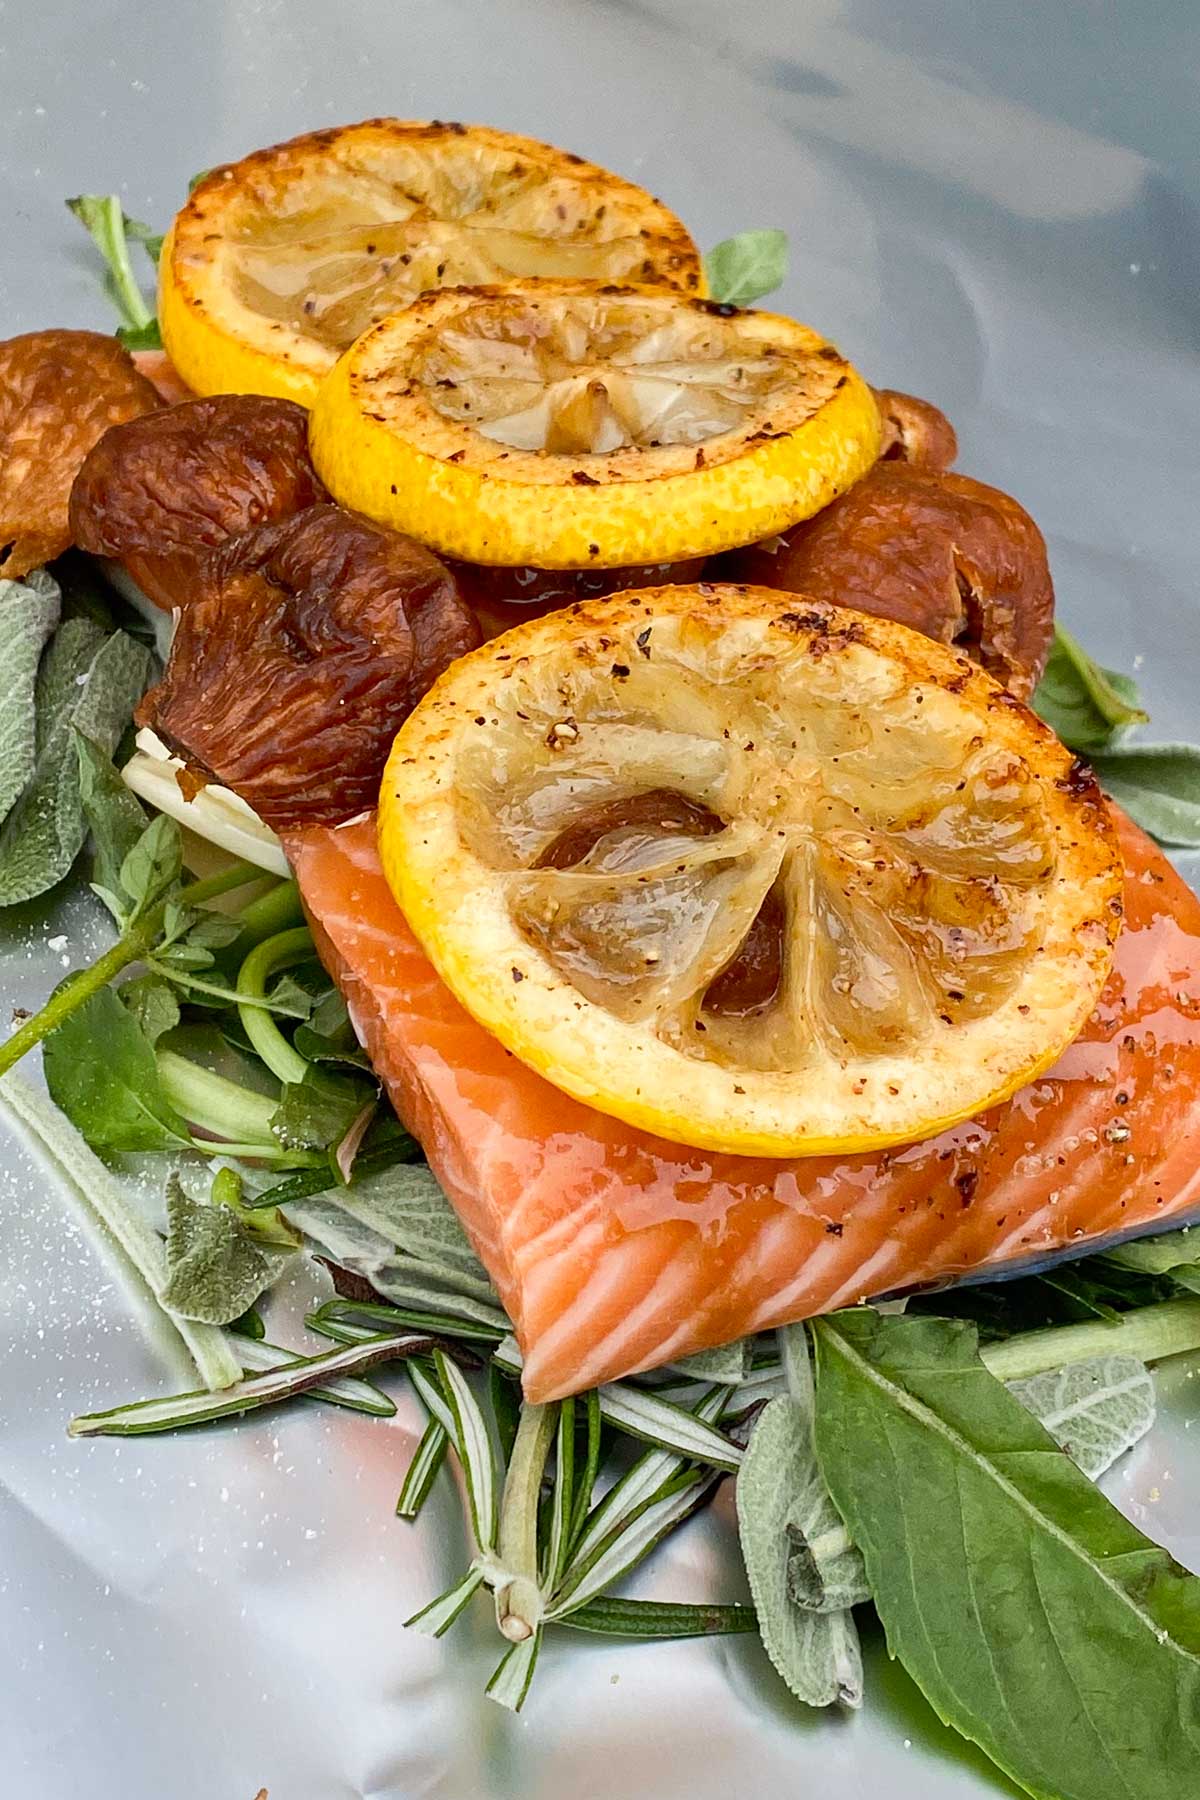 Uncooked salmon fillet on bed of fresh herbs and garlic, topped with figs and seared lemon slices.